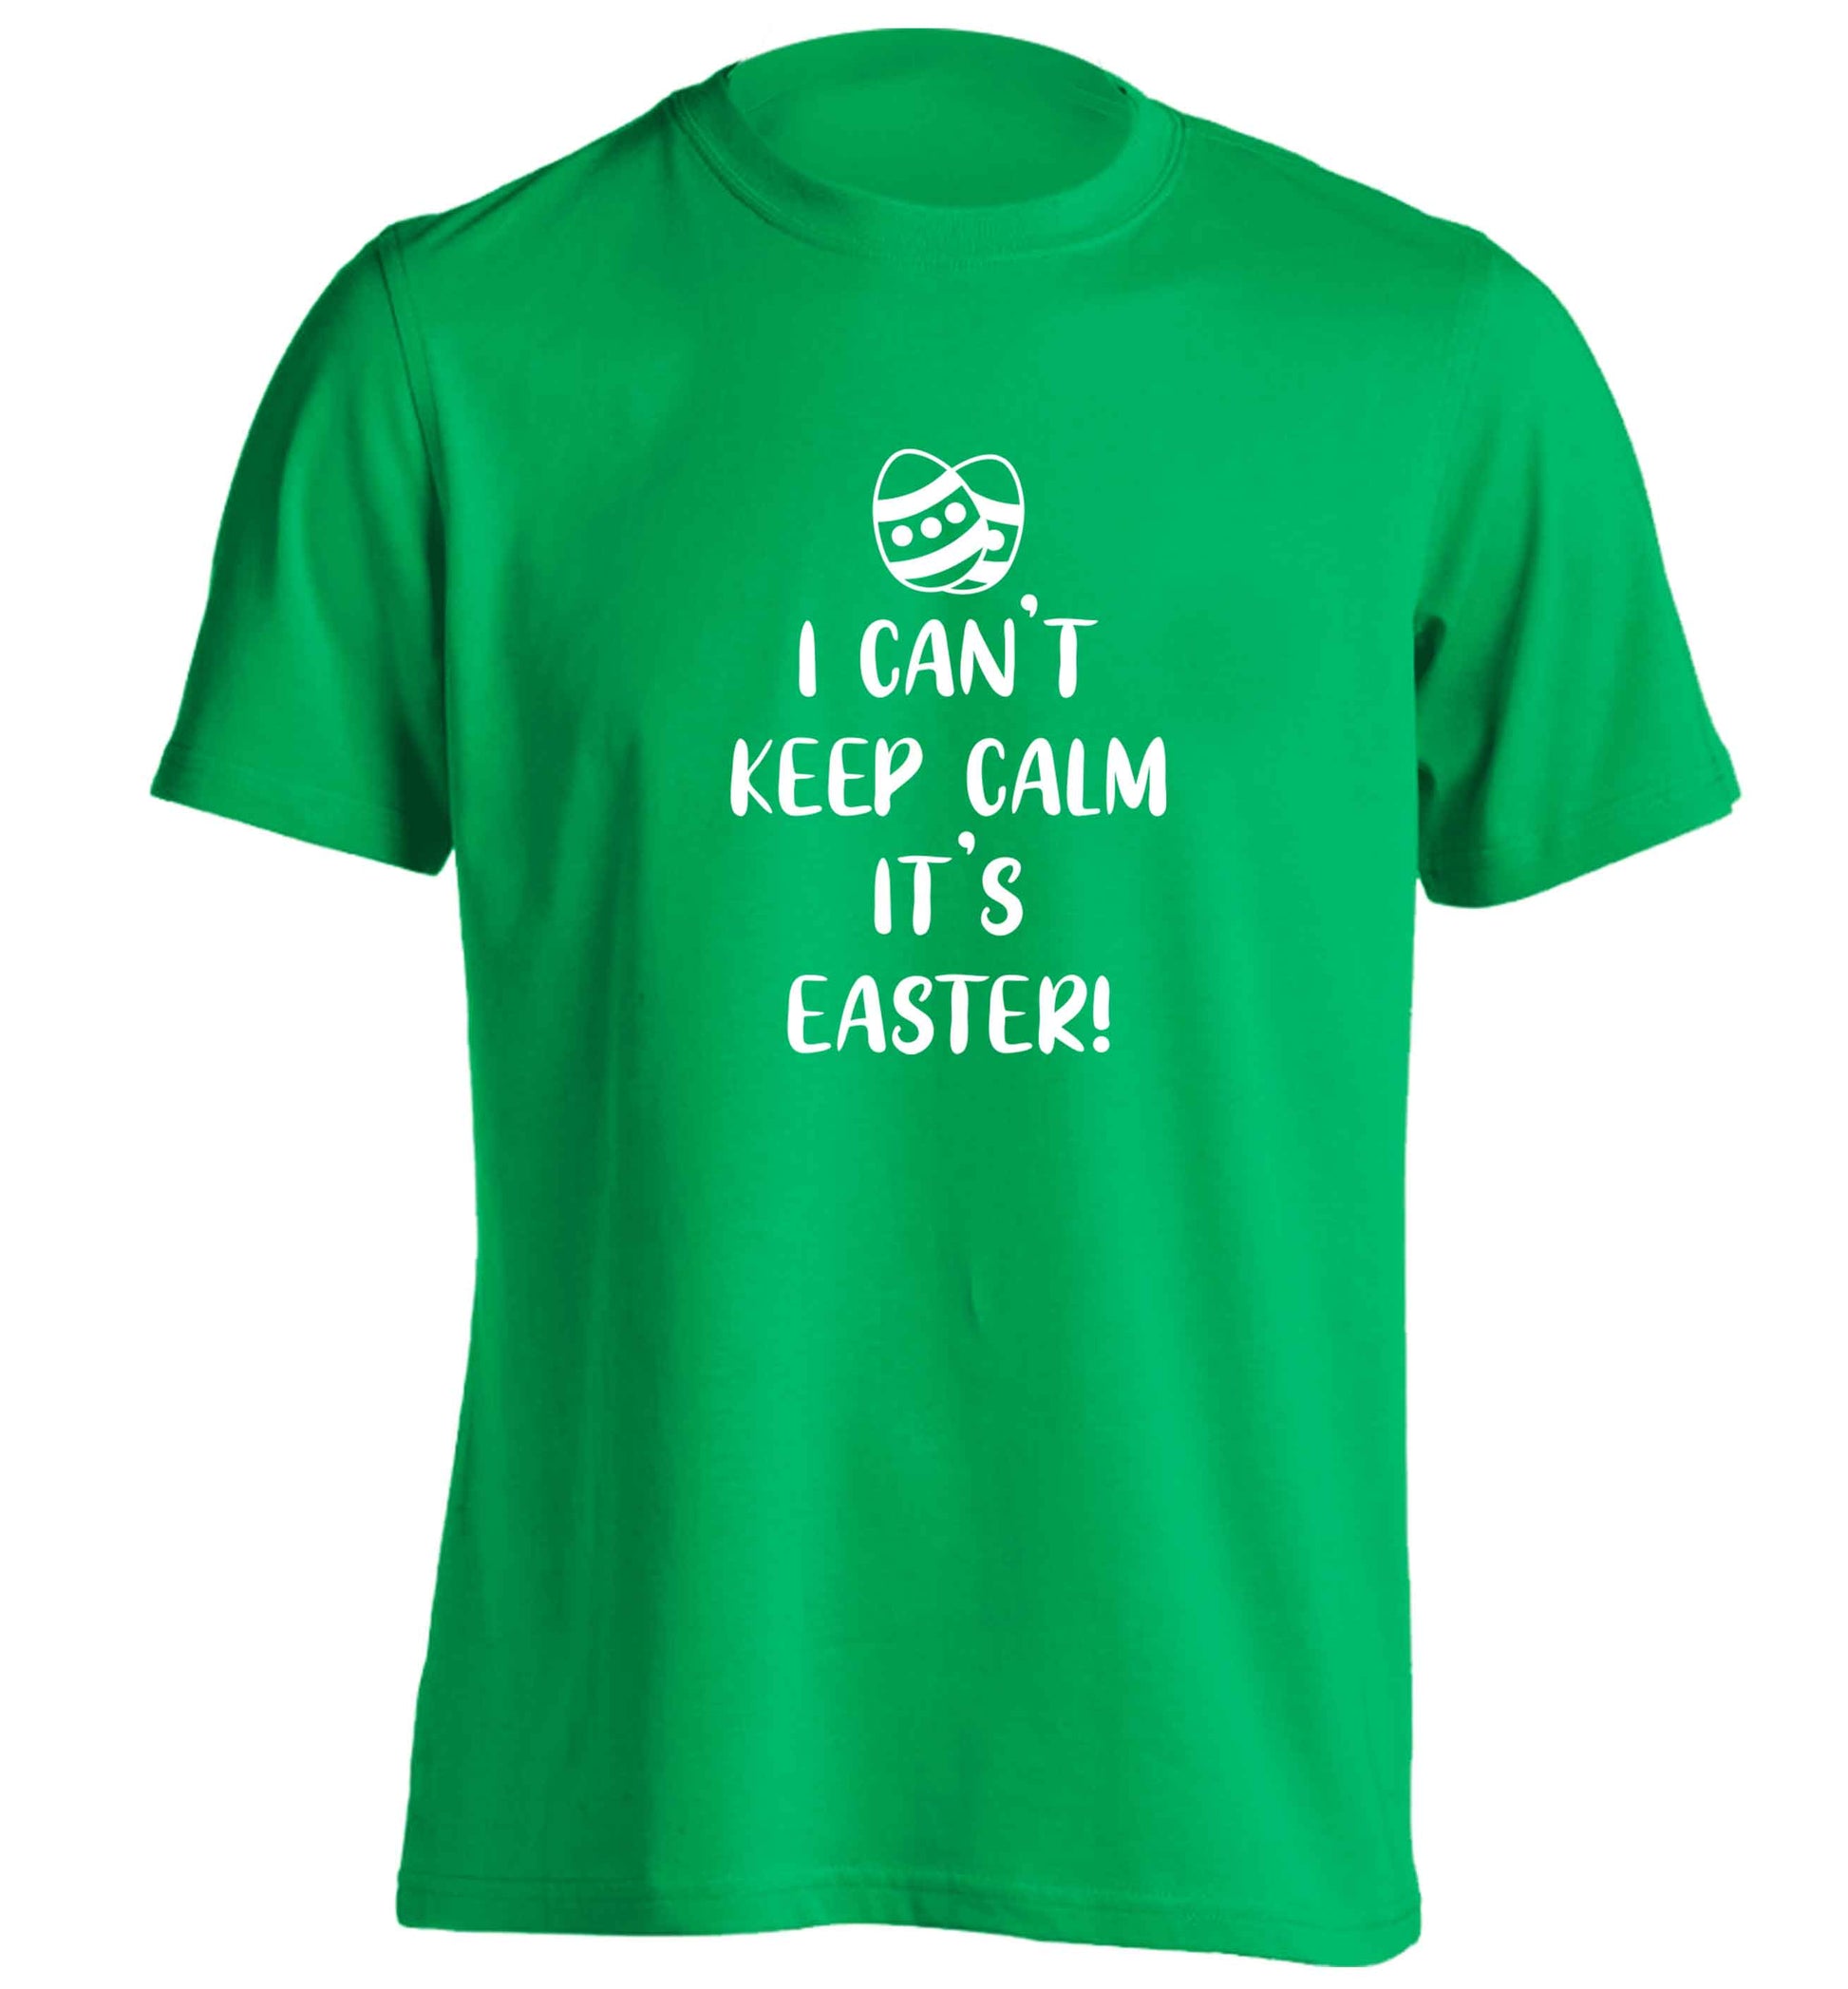 I can't keep calm it's Easter adults unisex green Tshirt 2XL